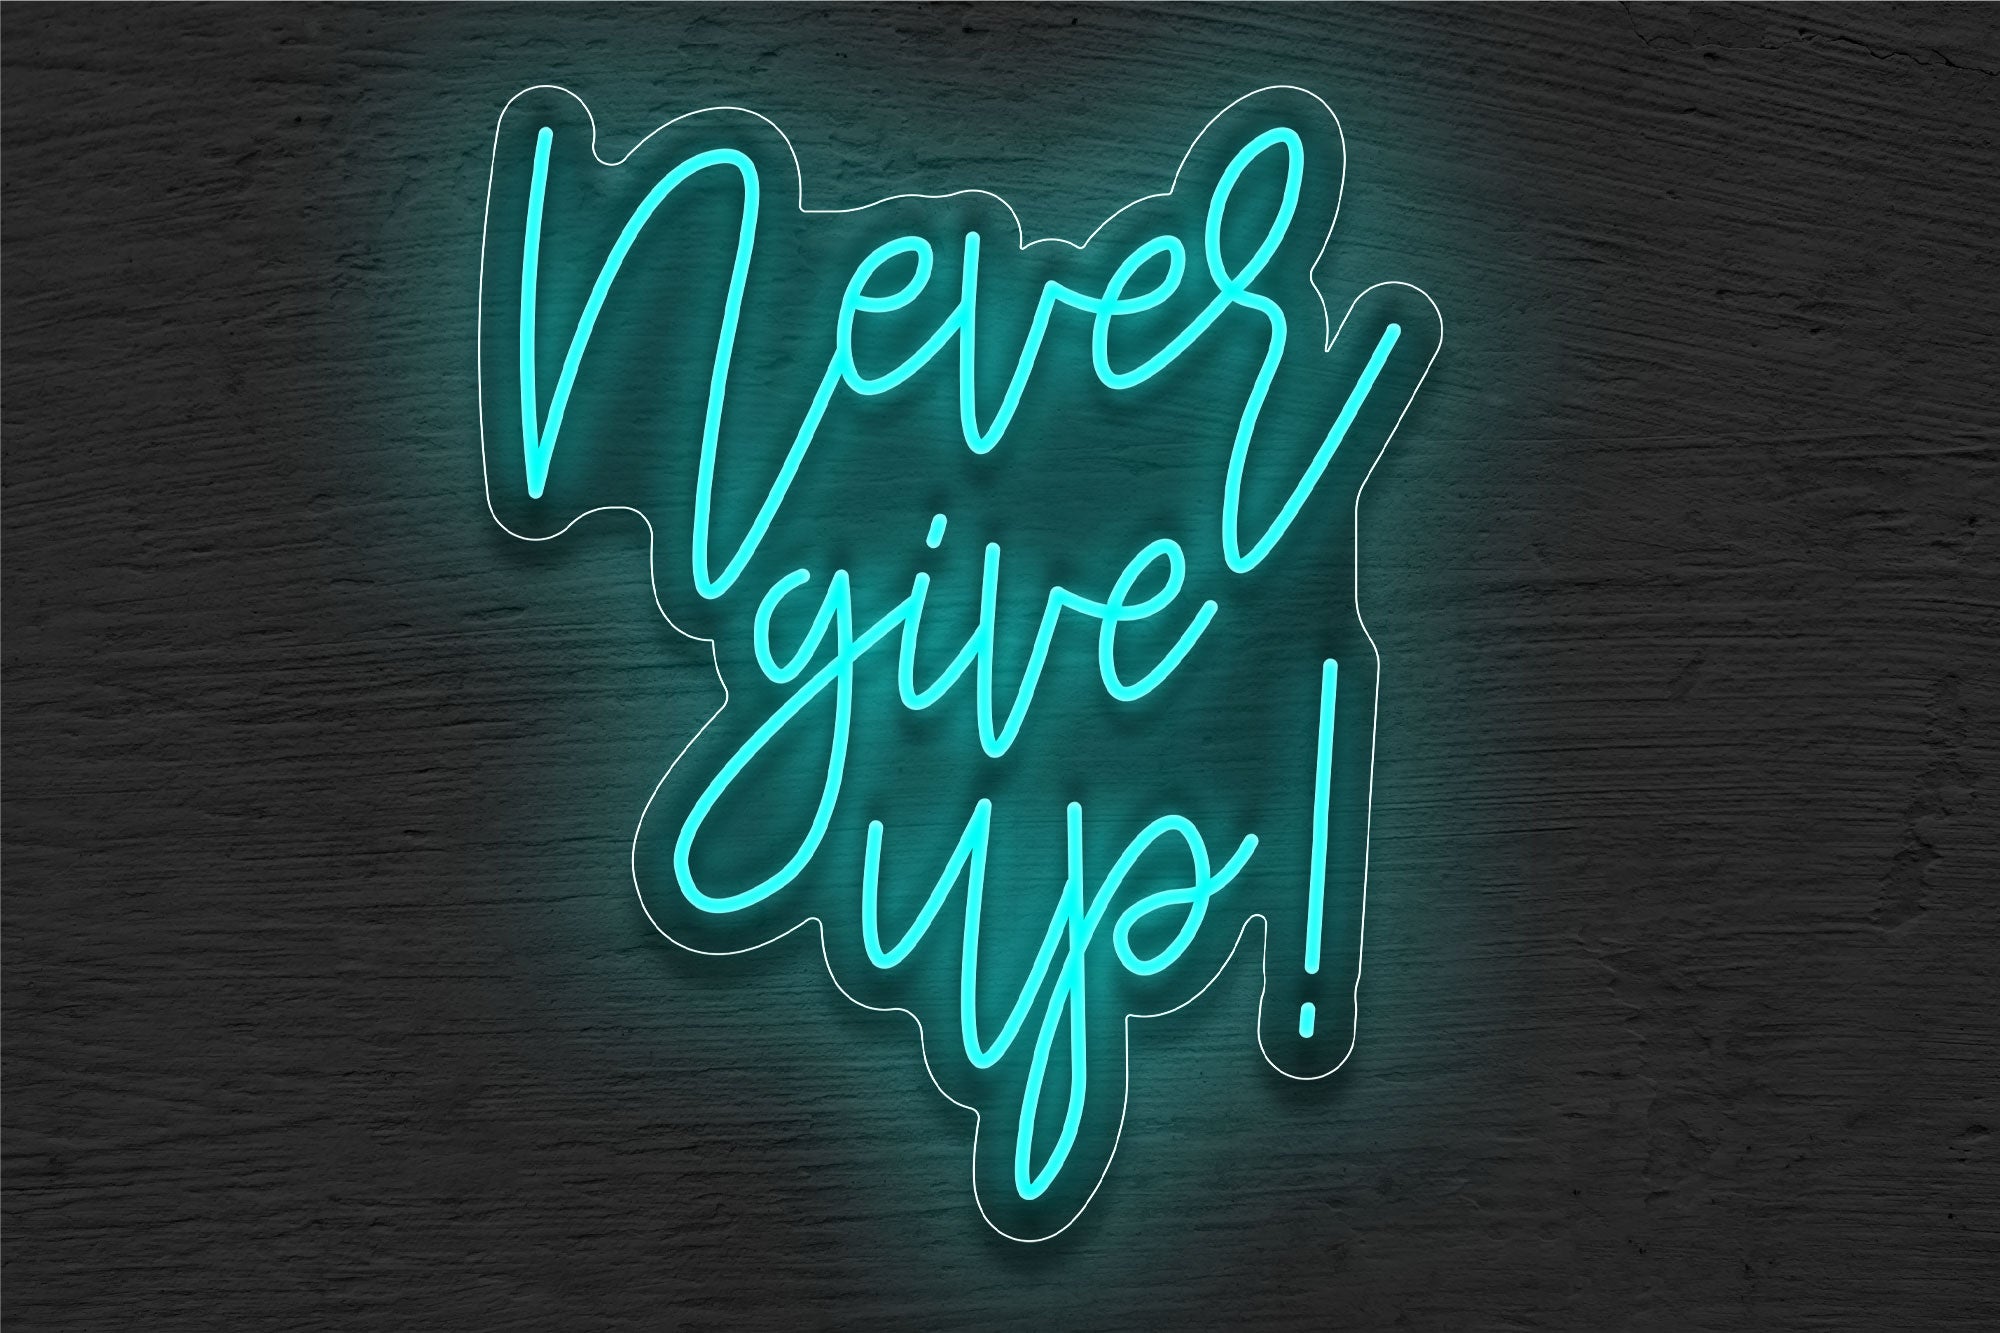 "Never give up!" LED Neon Sign